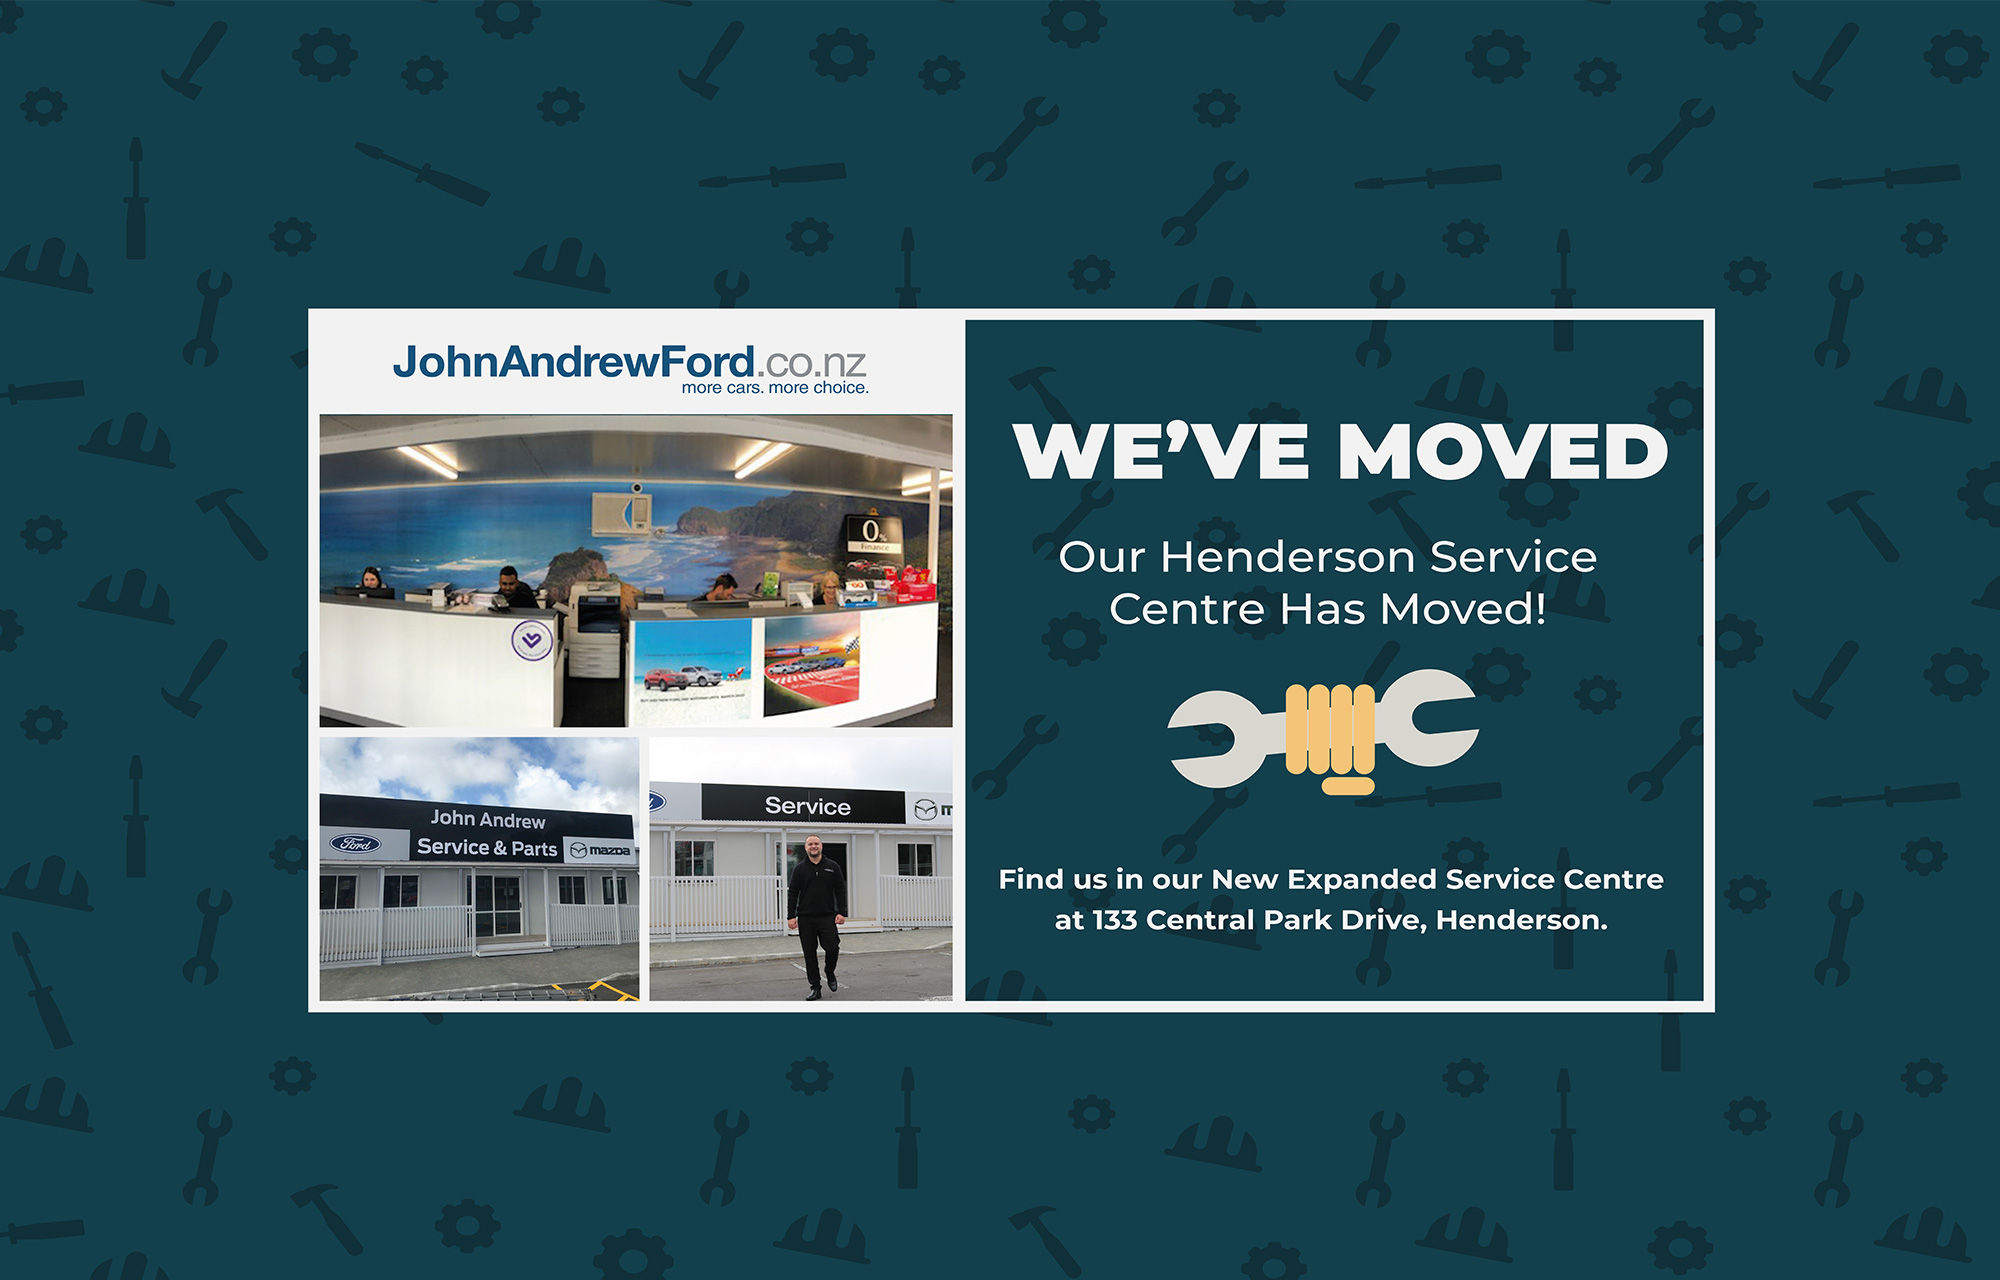 John Andrew Ford West Auckland has moved!